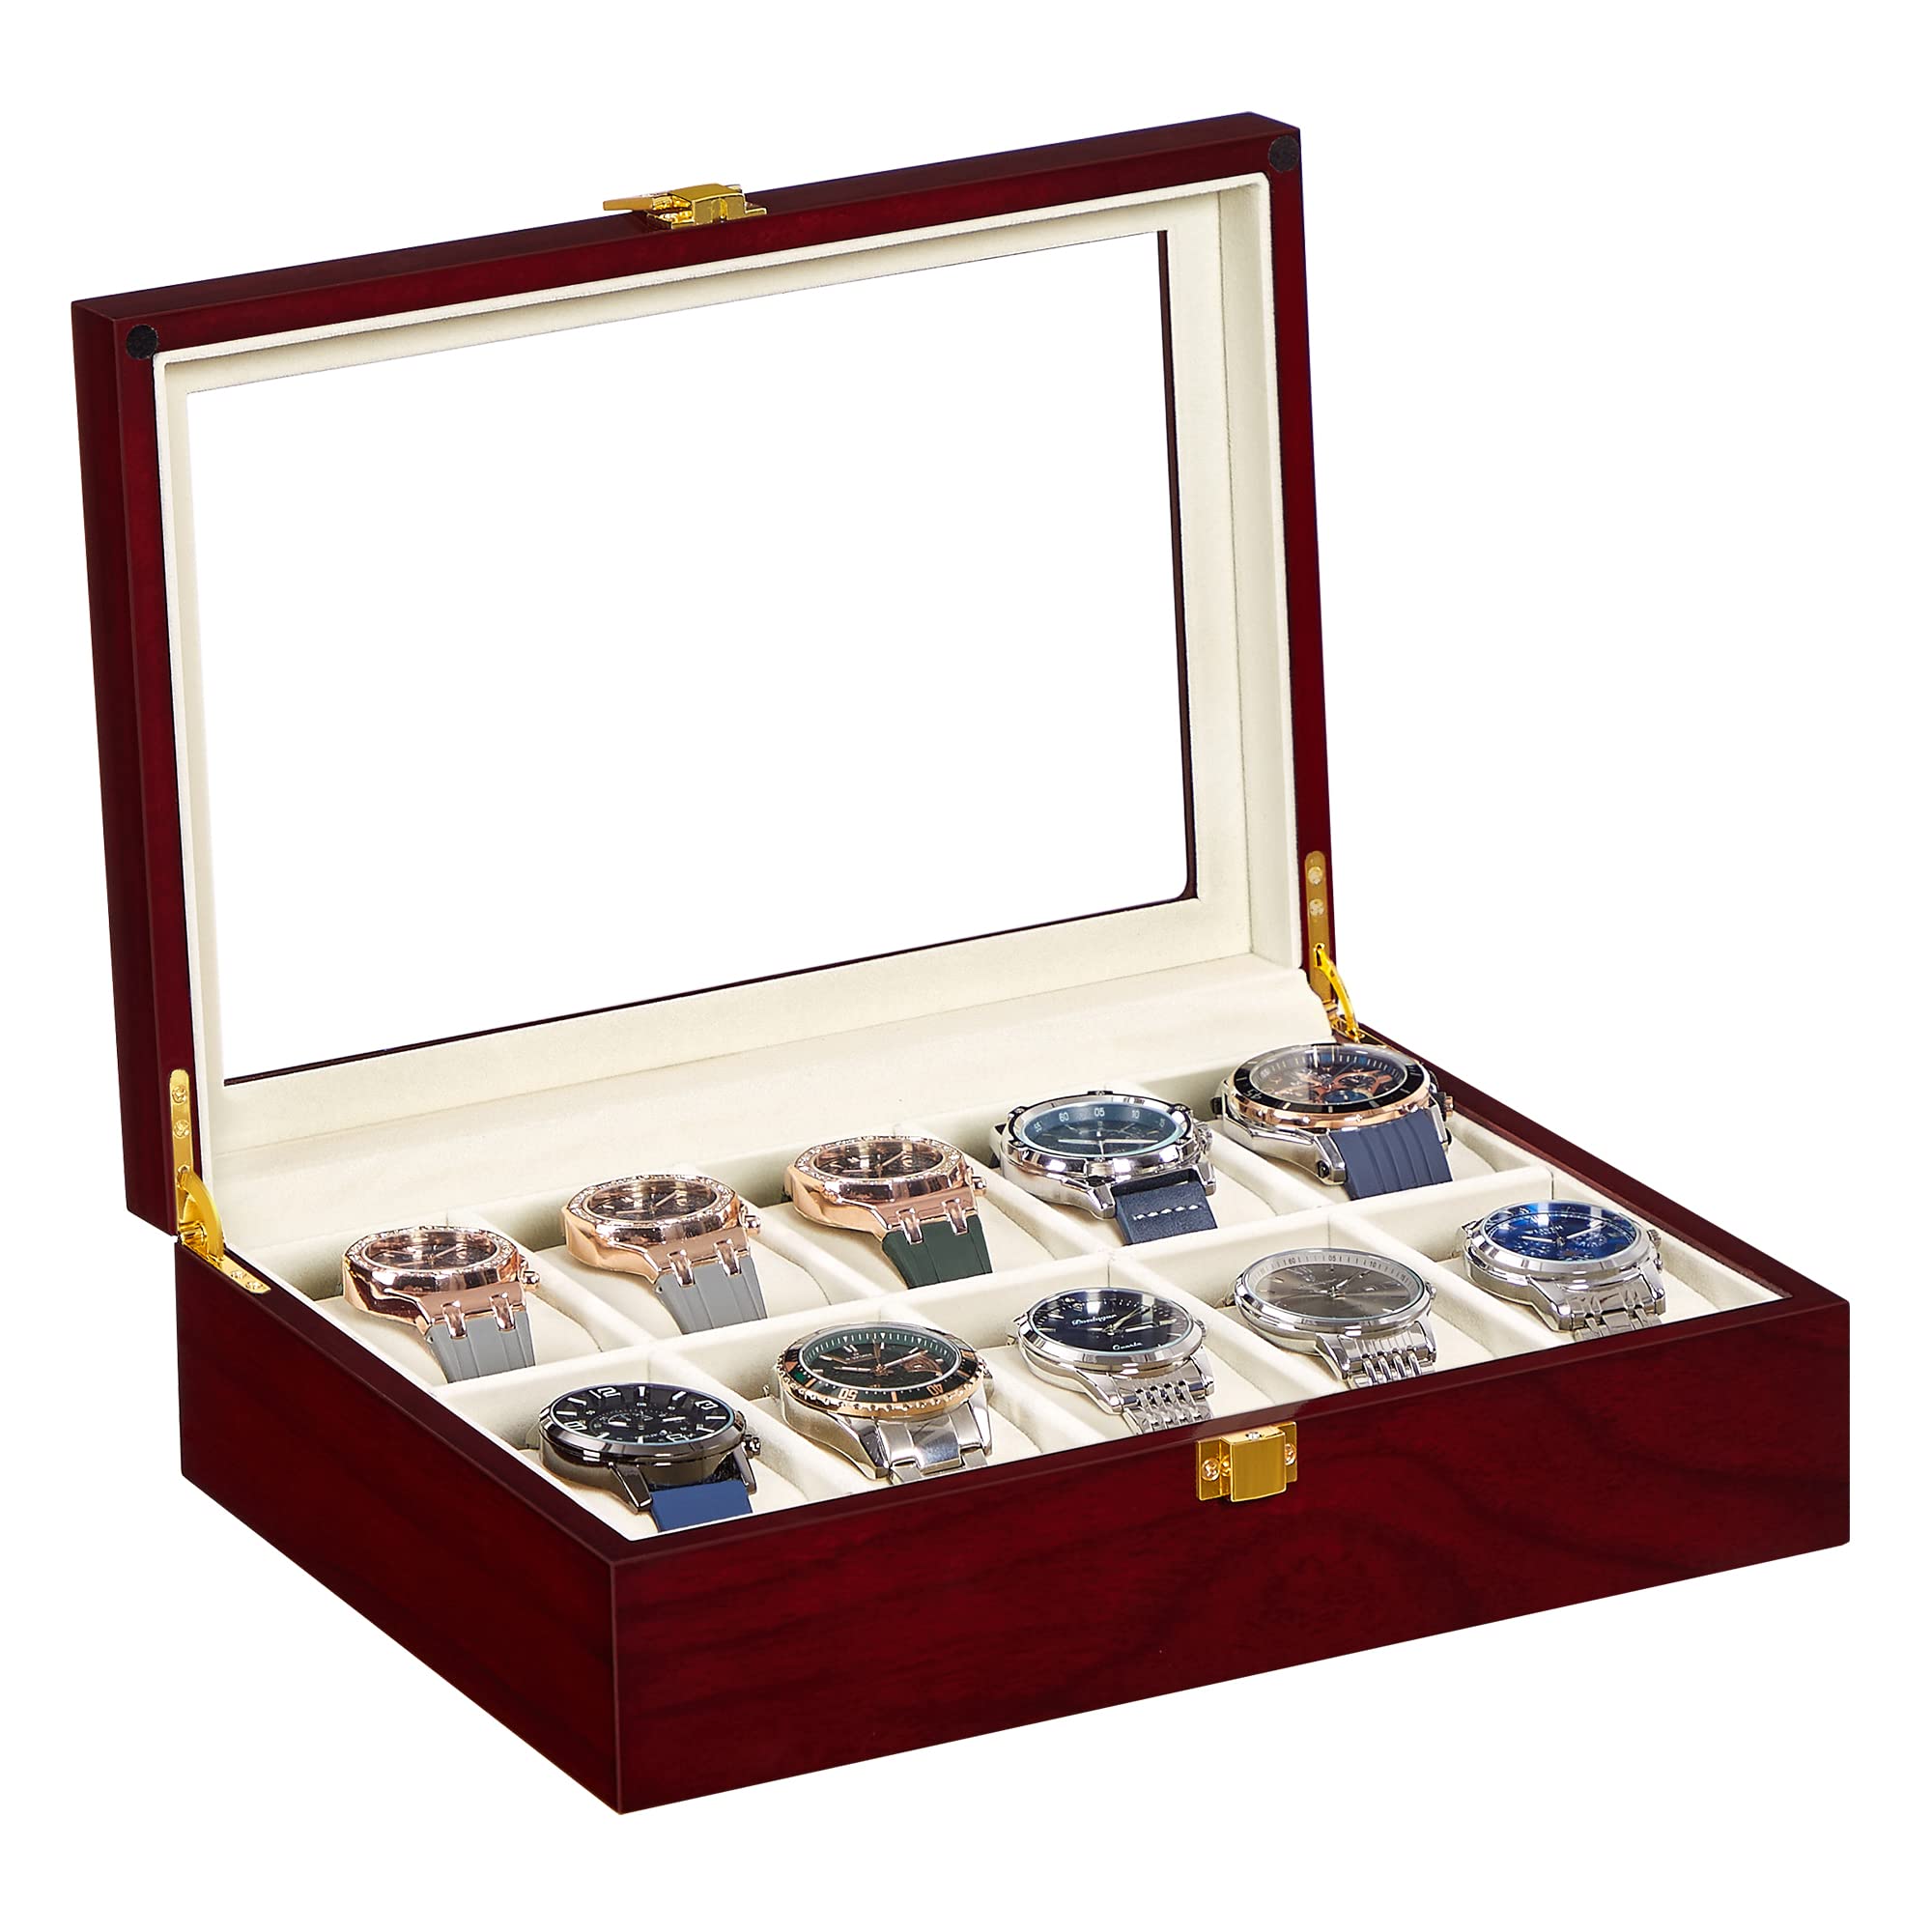 SONGMICS Watch Box, 10-Slot Watch Case with Large Glass Lid, Removable Watch Pillows, Velvet Lining, Watch Box Organizer, Gift for Loved Ones, Cherry Color UJOW10C